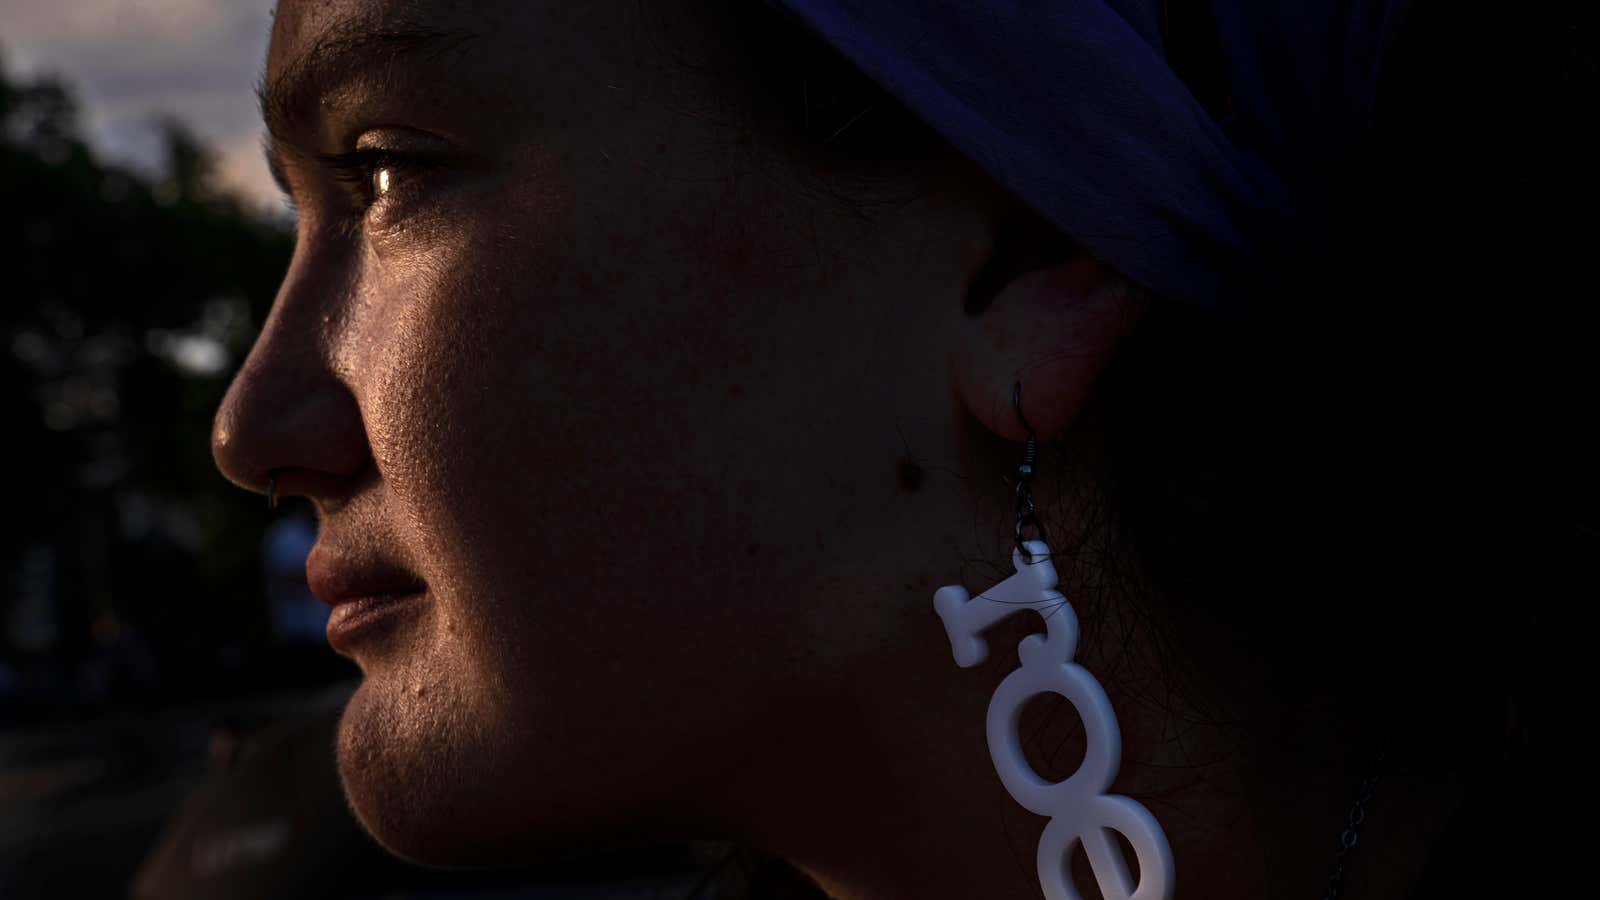 Abortion rights supporter Lilly, who declined to provide a last name, watches the sunset near the Supreme Court on June 28, 2022 in Washington, DC.